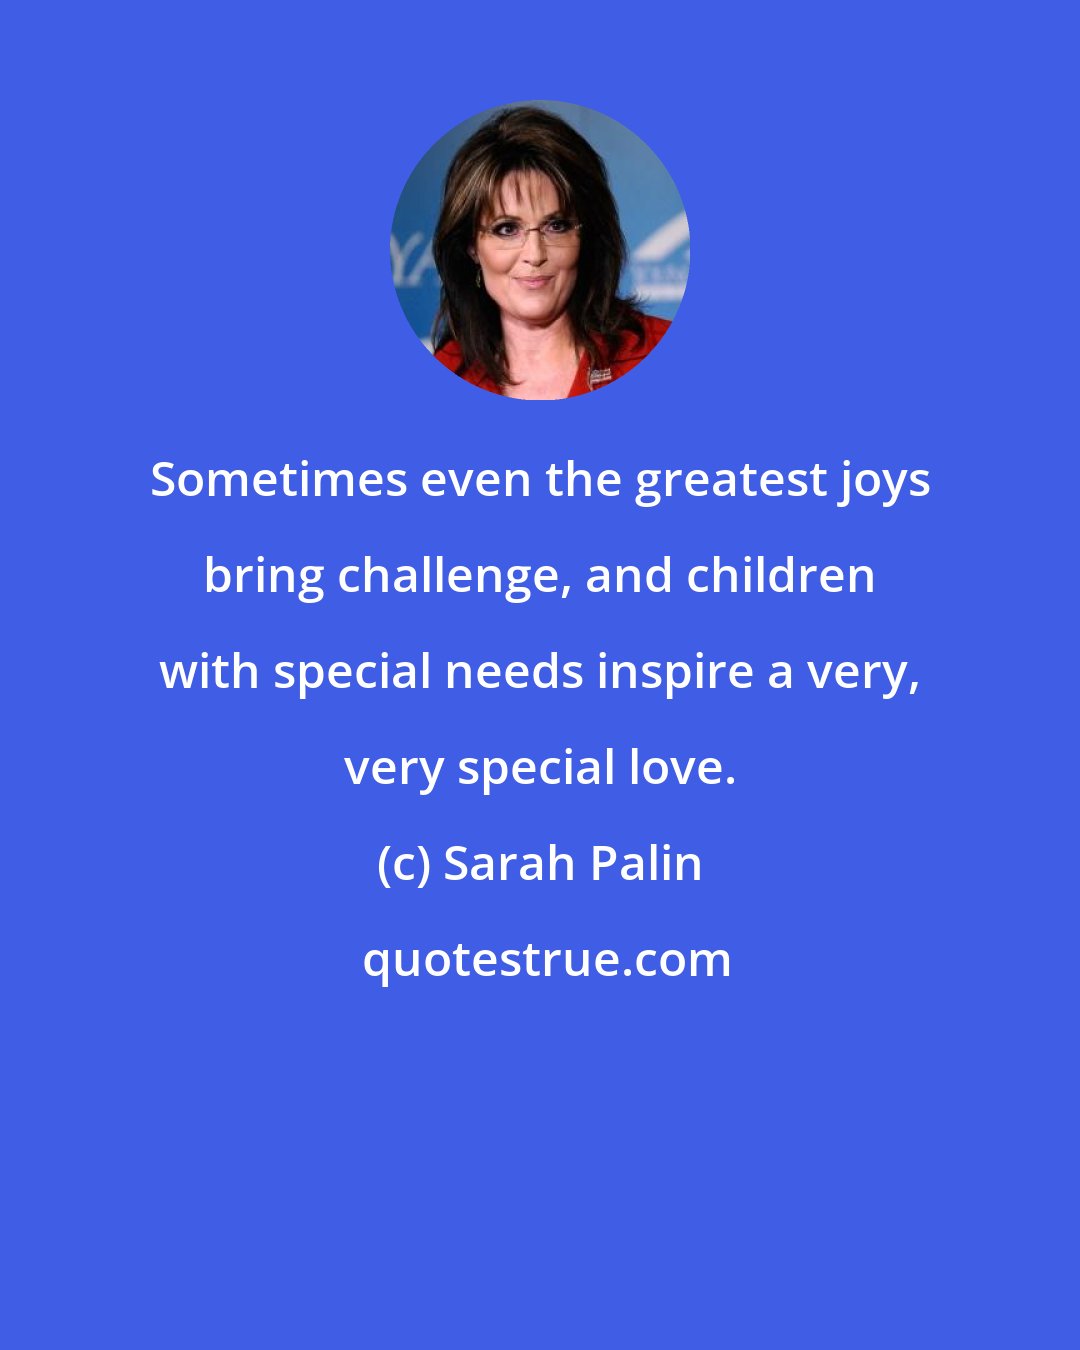 Sarah Palin: Sometimes even the greatest joys bring challenge, and children with special needs inspire a very, very special love.